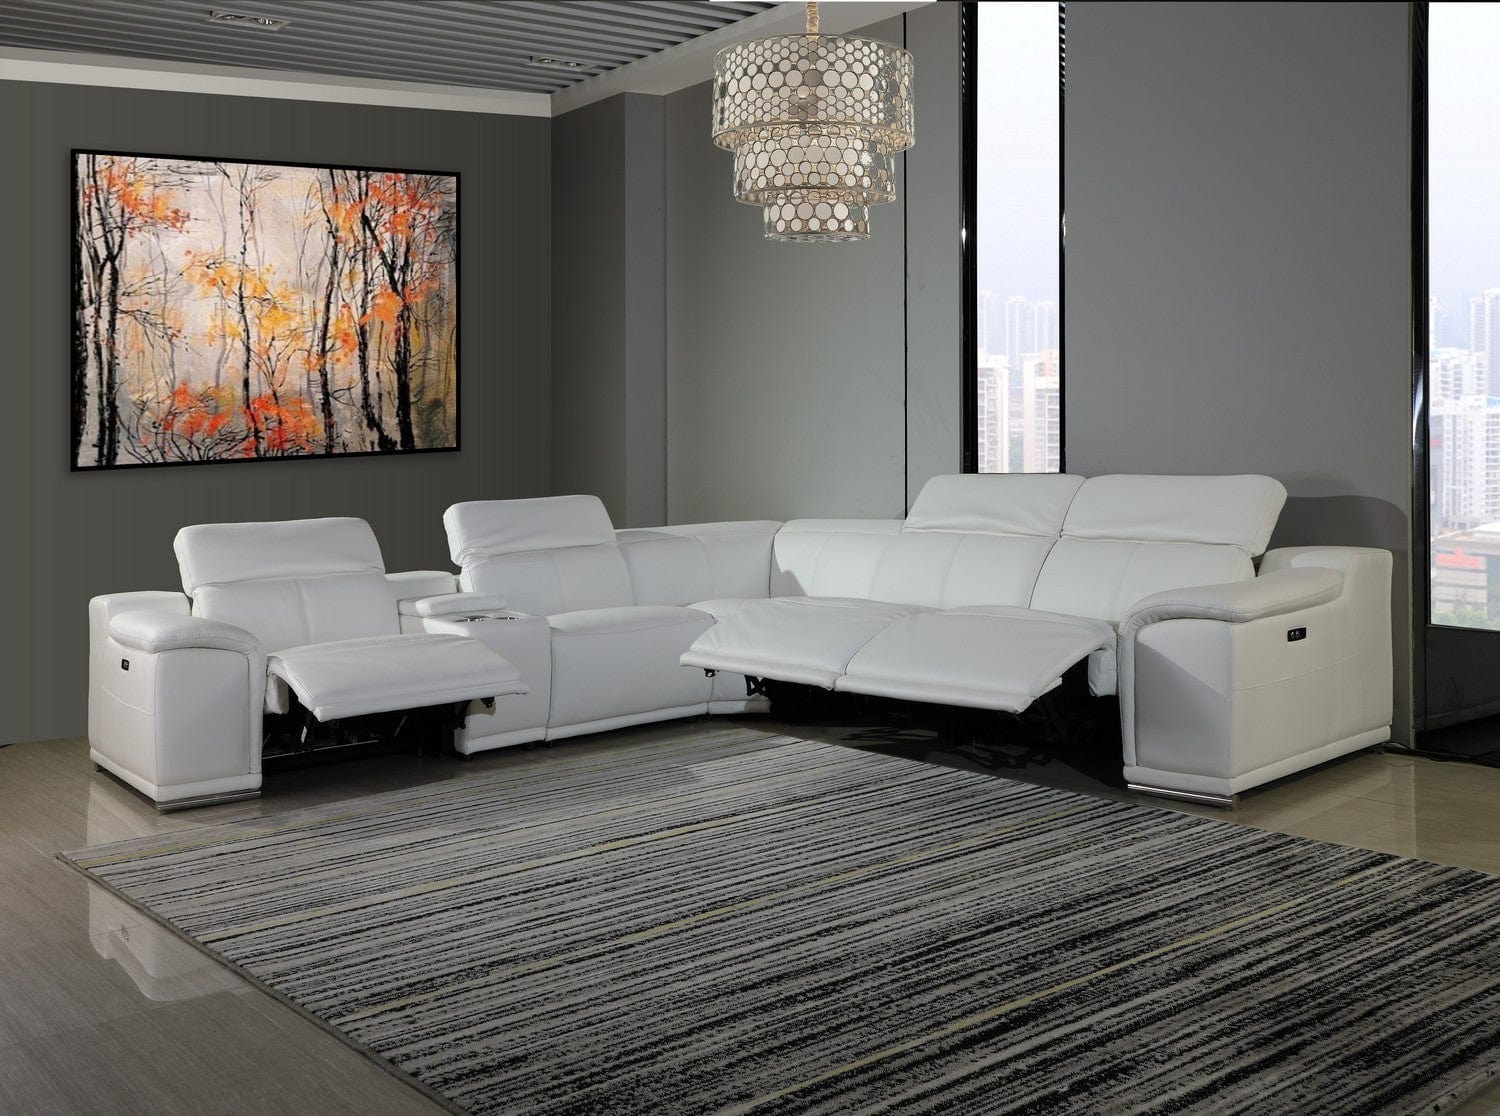 by Global United Sofa 6PC Sectional | 3 Power Reclining / White Global United 9762 - Divanitalia 3-Power Reclining 6PC Sectional w/ 1-Console